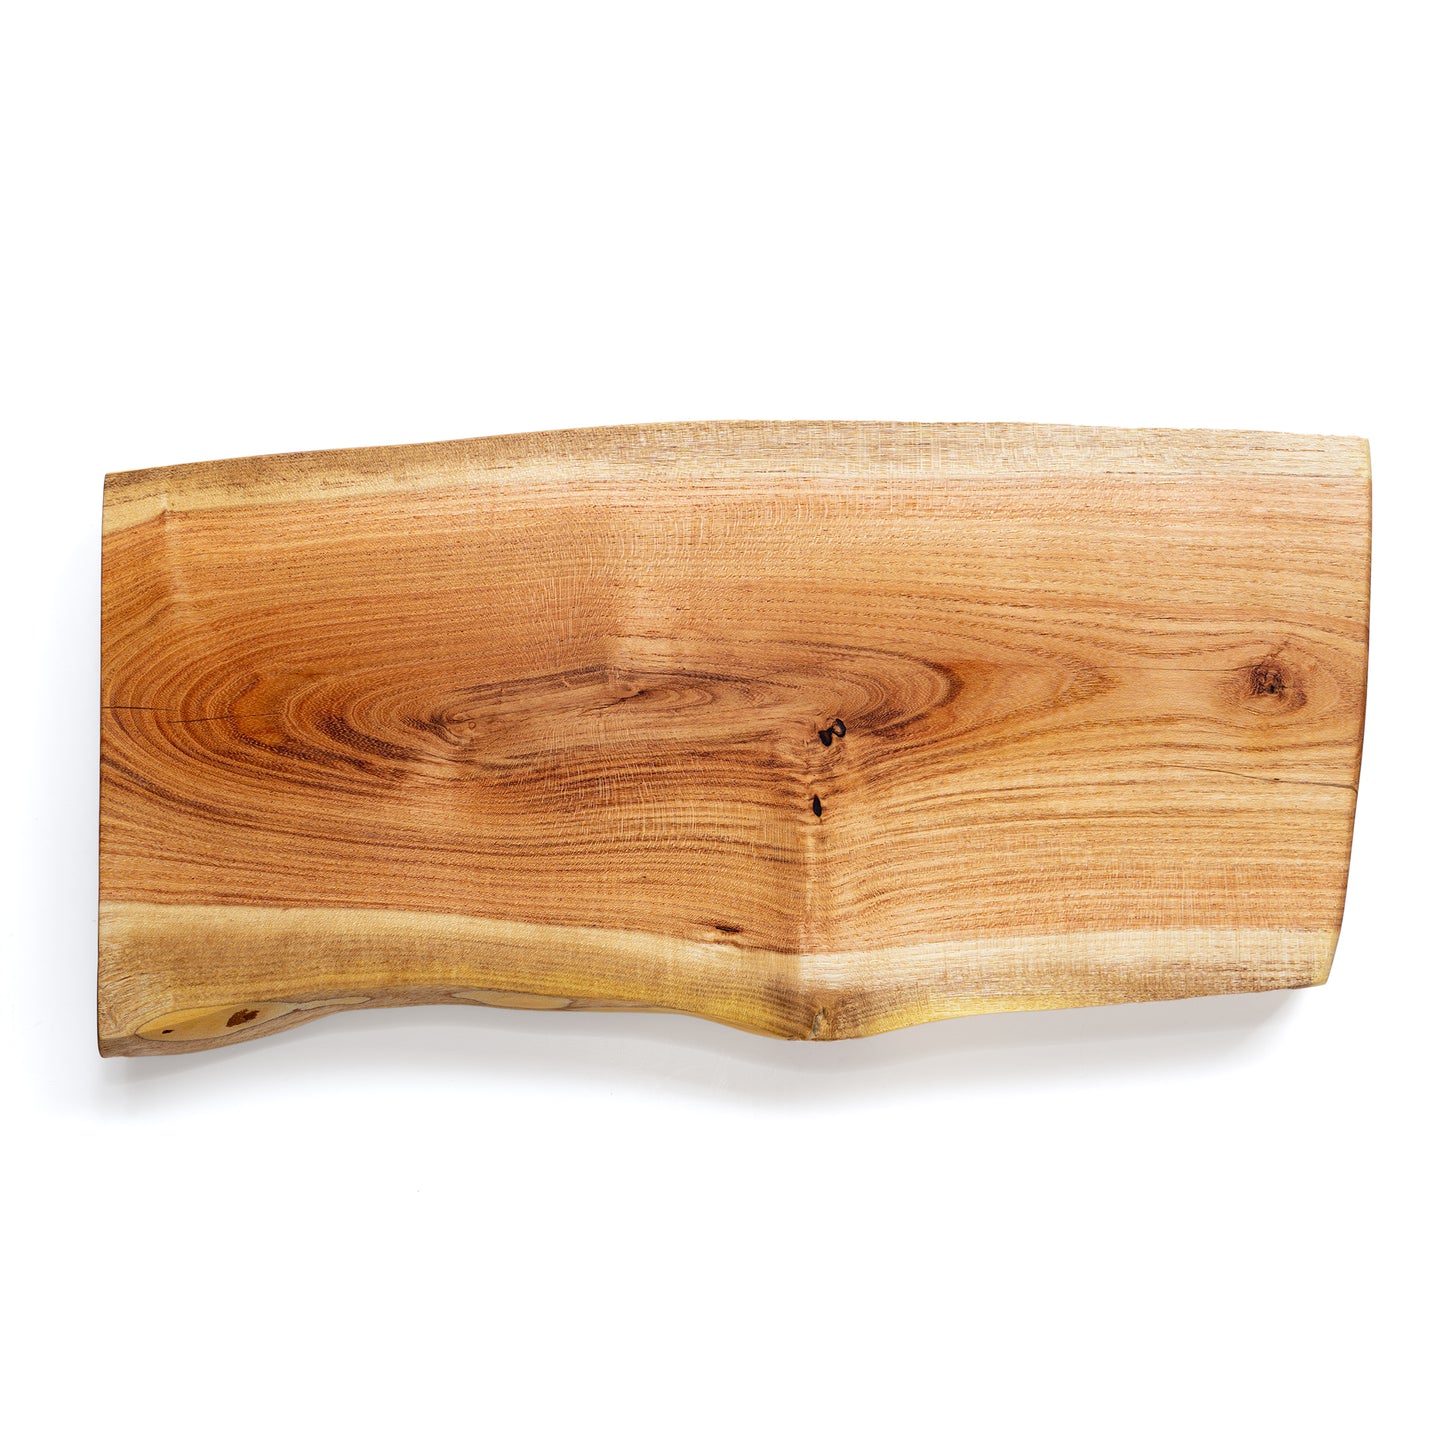 Honey Locust Wood Handcrafted Charcuterie Board